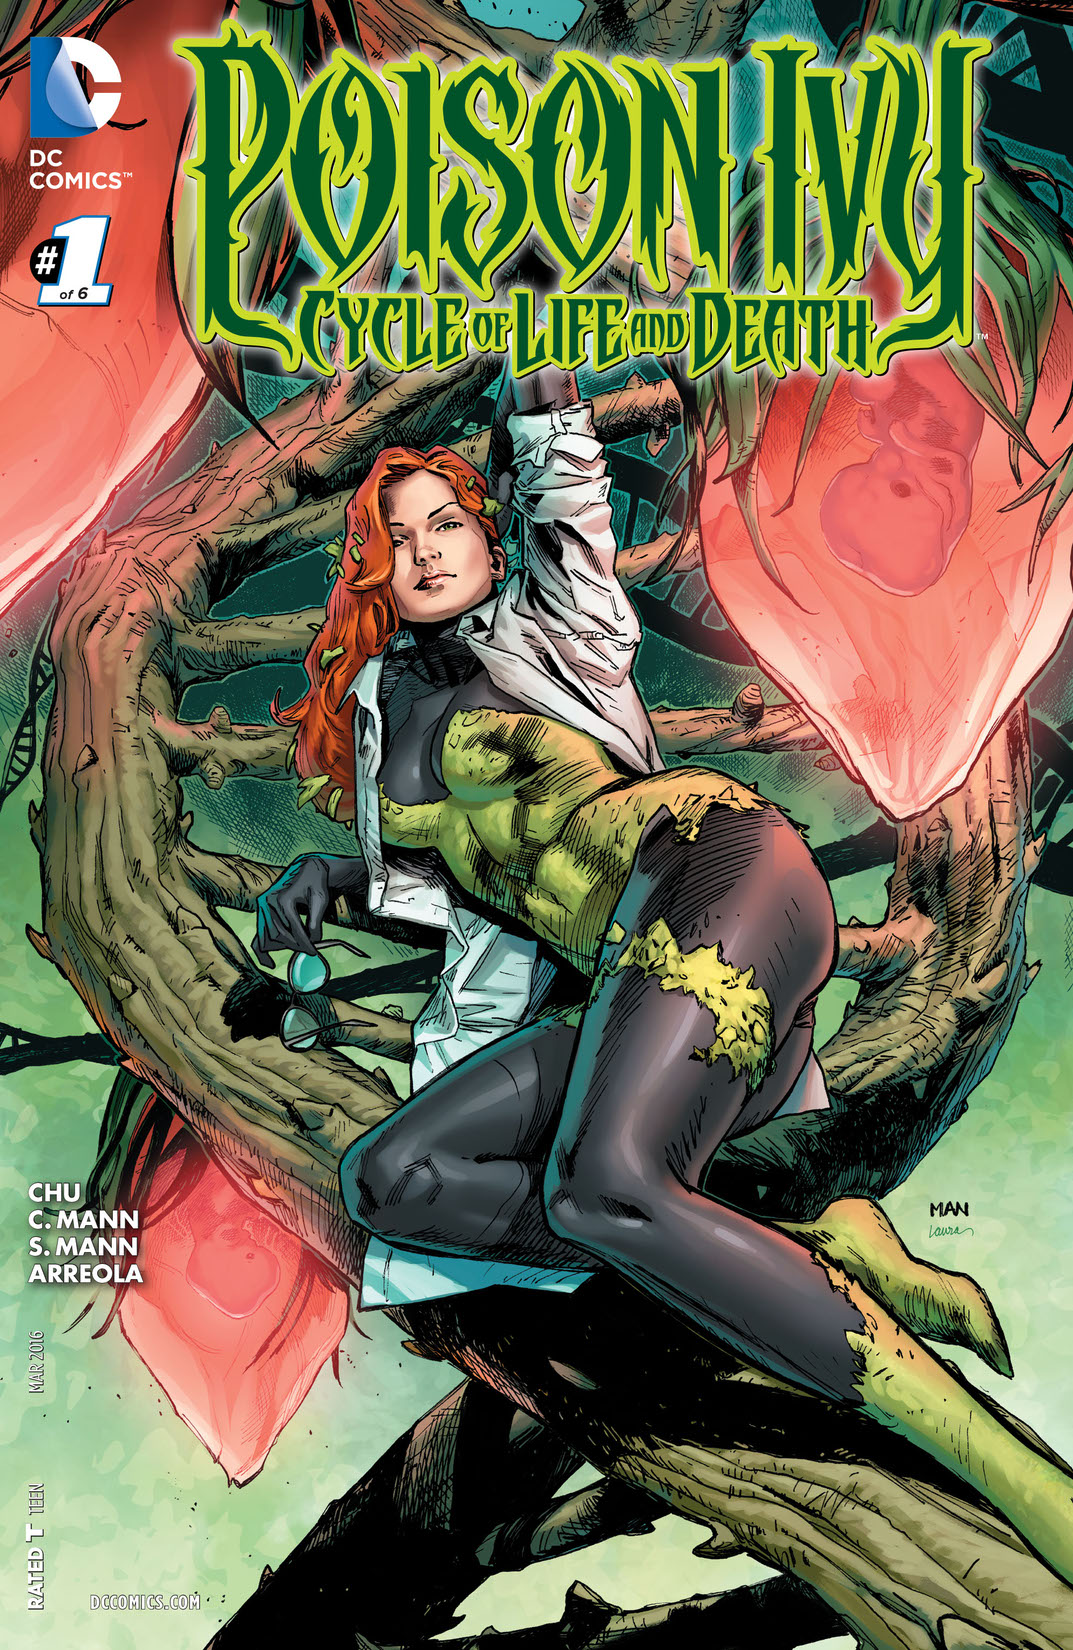 Poison Ivy: Cycle of Life and Death #1 preview images